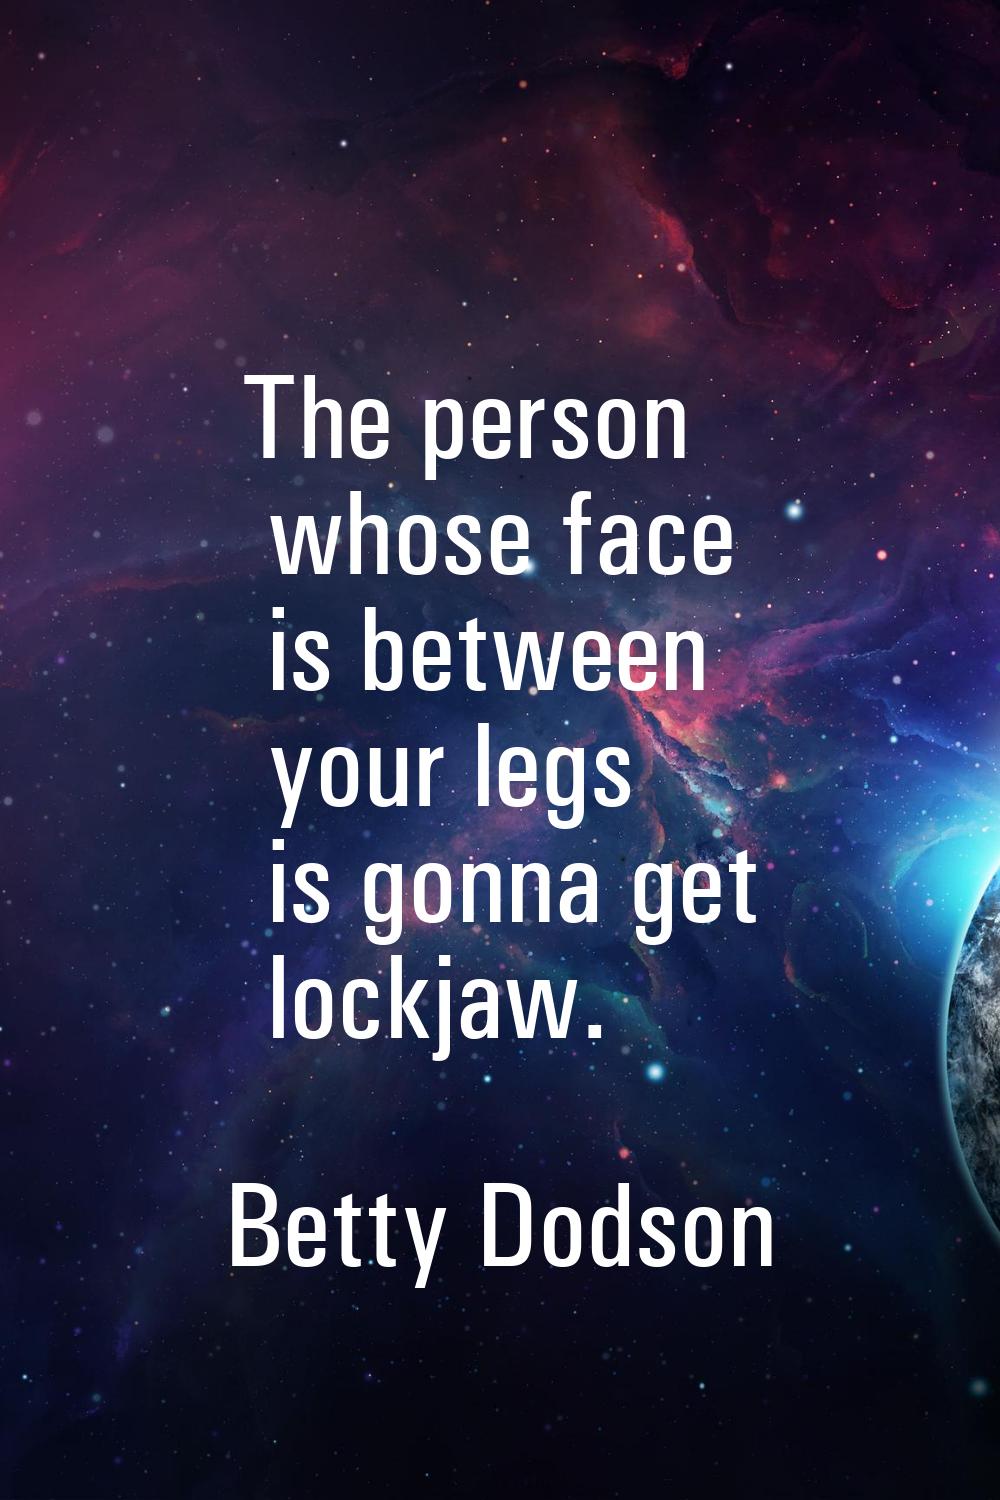 The person whose face is between your legs is gonna get lockjaw.